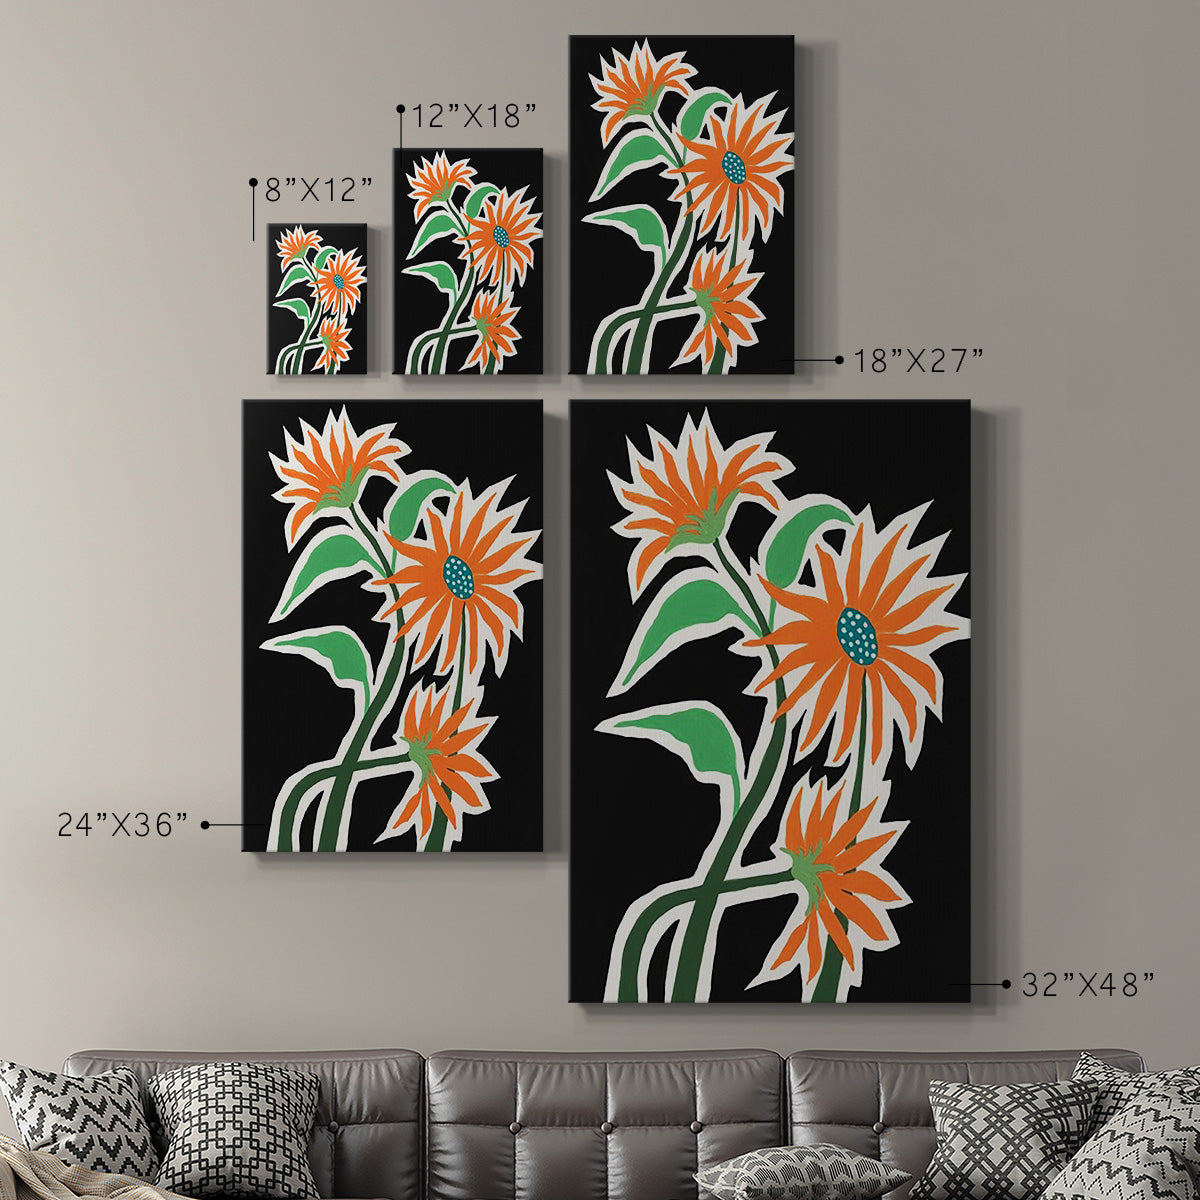 Pop Flowers III Premium Gallery Wrapped Canvas - Ready to Hang